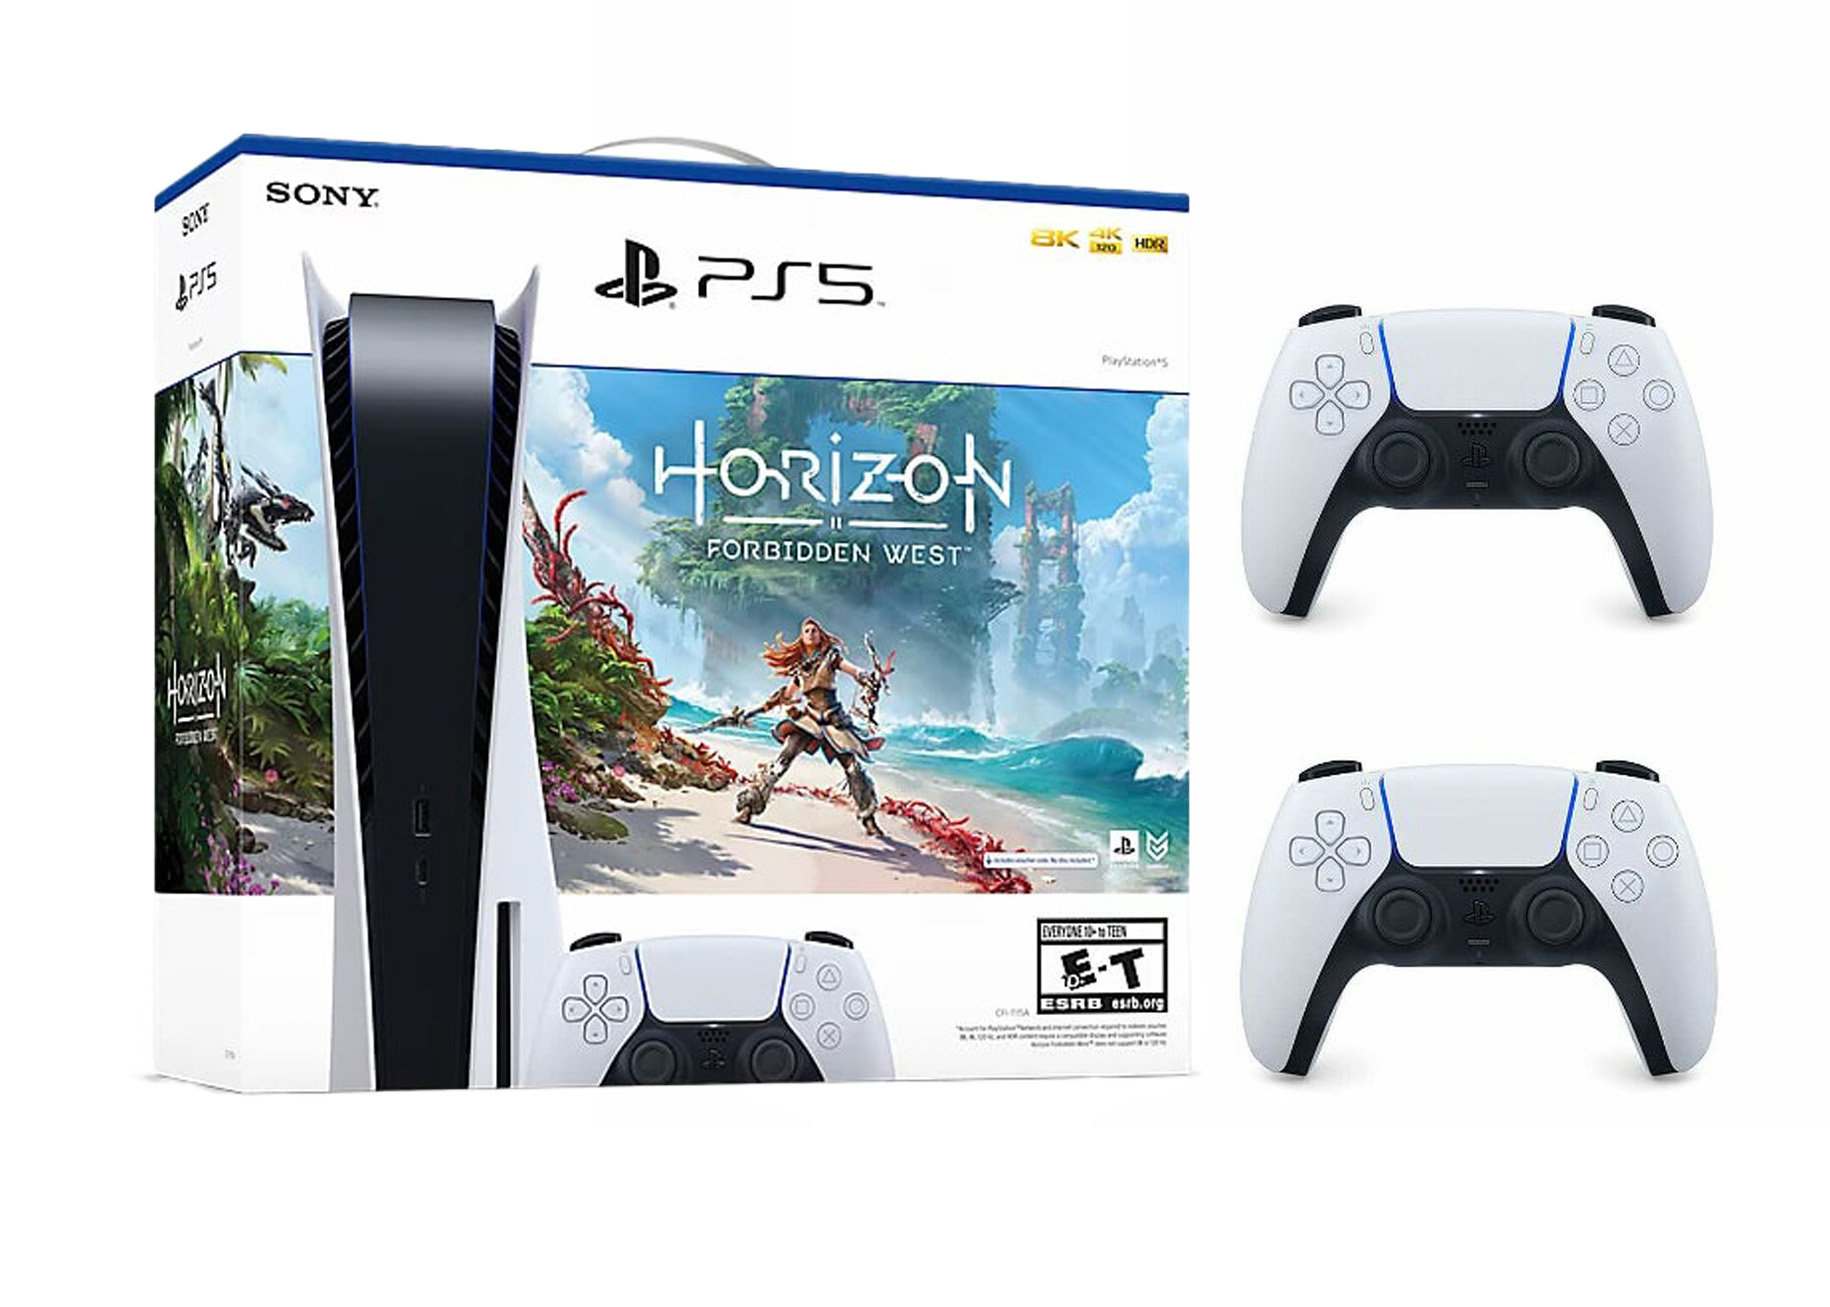 Sony Playstation 5 PS5 Horizon Forbidden West Blu-Ray Console with Extra  DualSense Wireless Controller Bundle (US Plug)  1000032115/1000032000-3005715